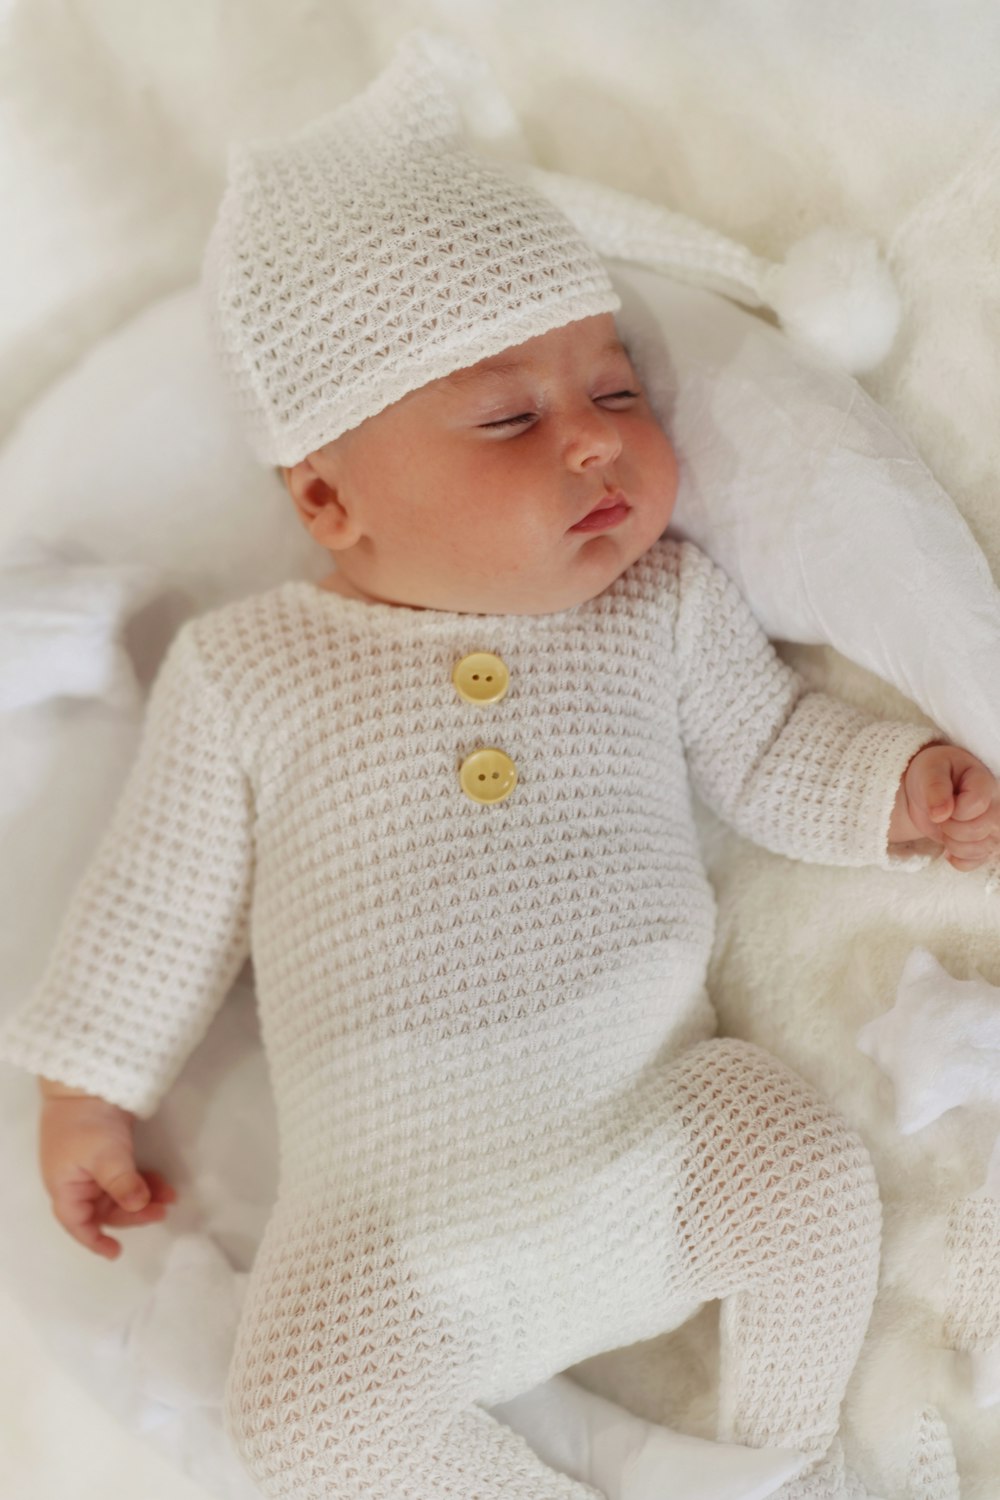 a baby wearing a white outfit